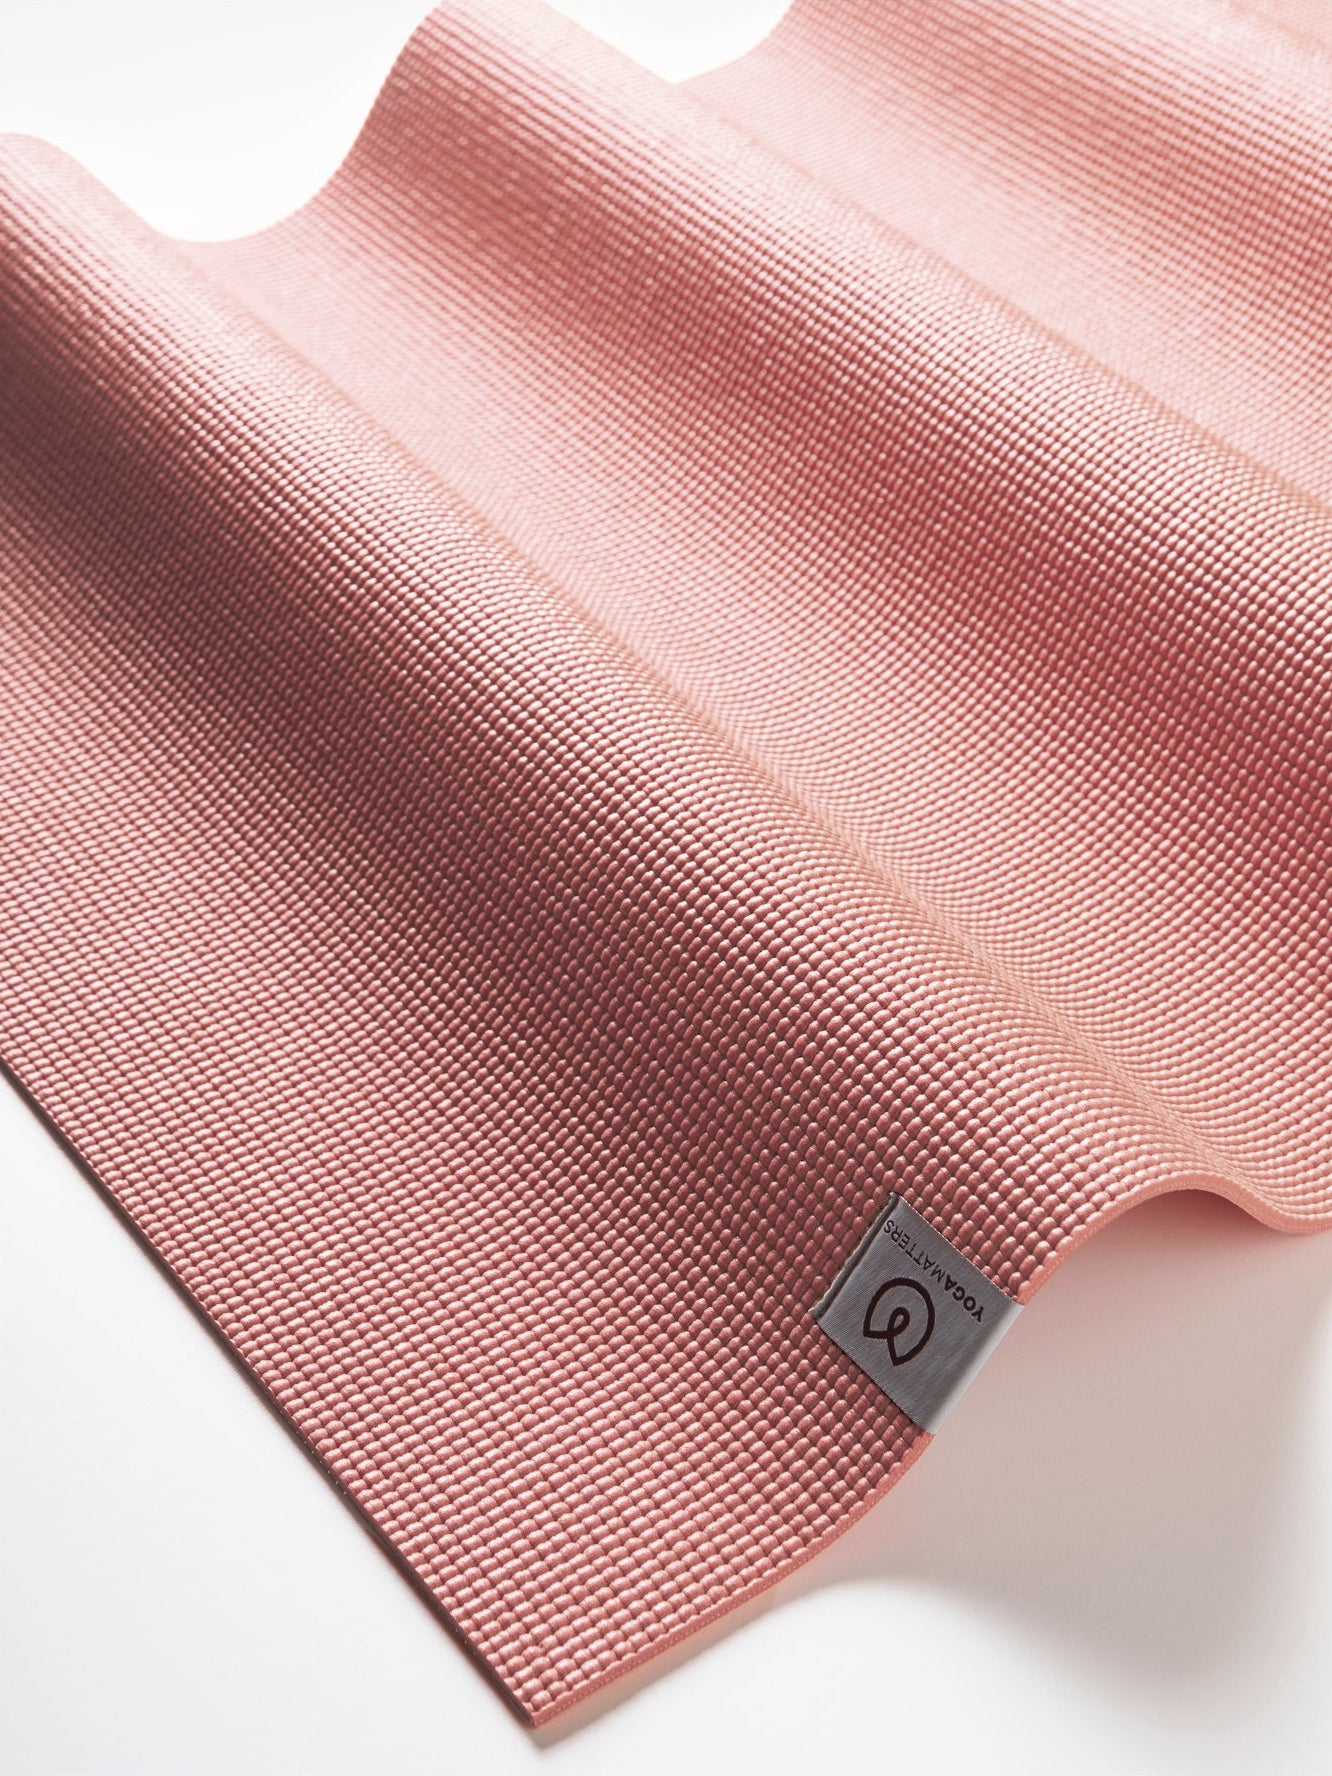 Close-up of a textured coral pink yoga mat from a side angle with visible brand logo